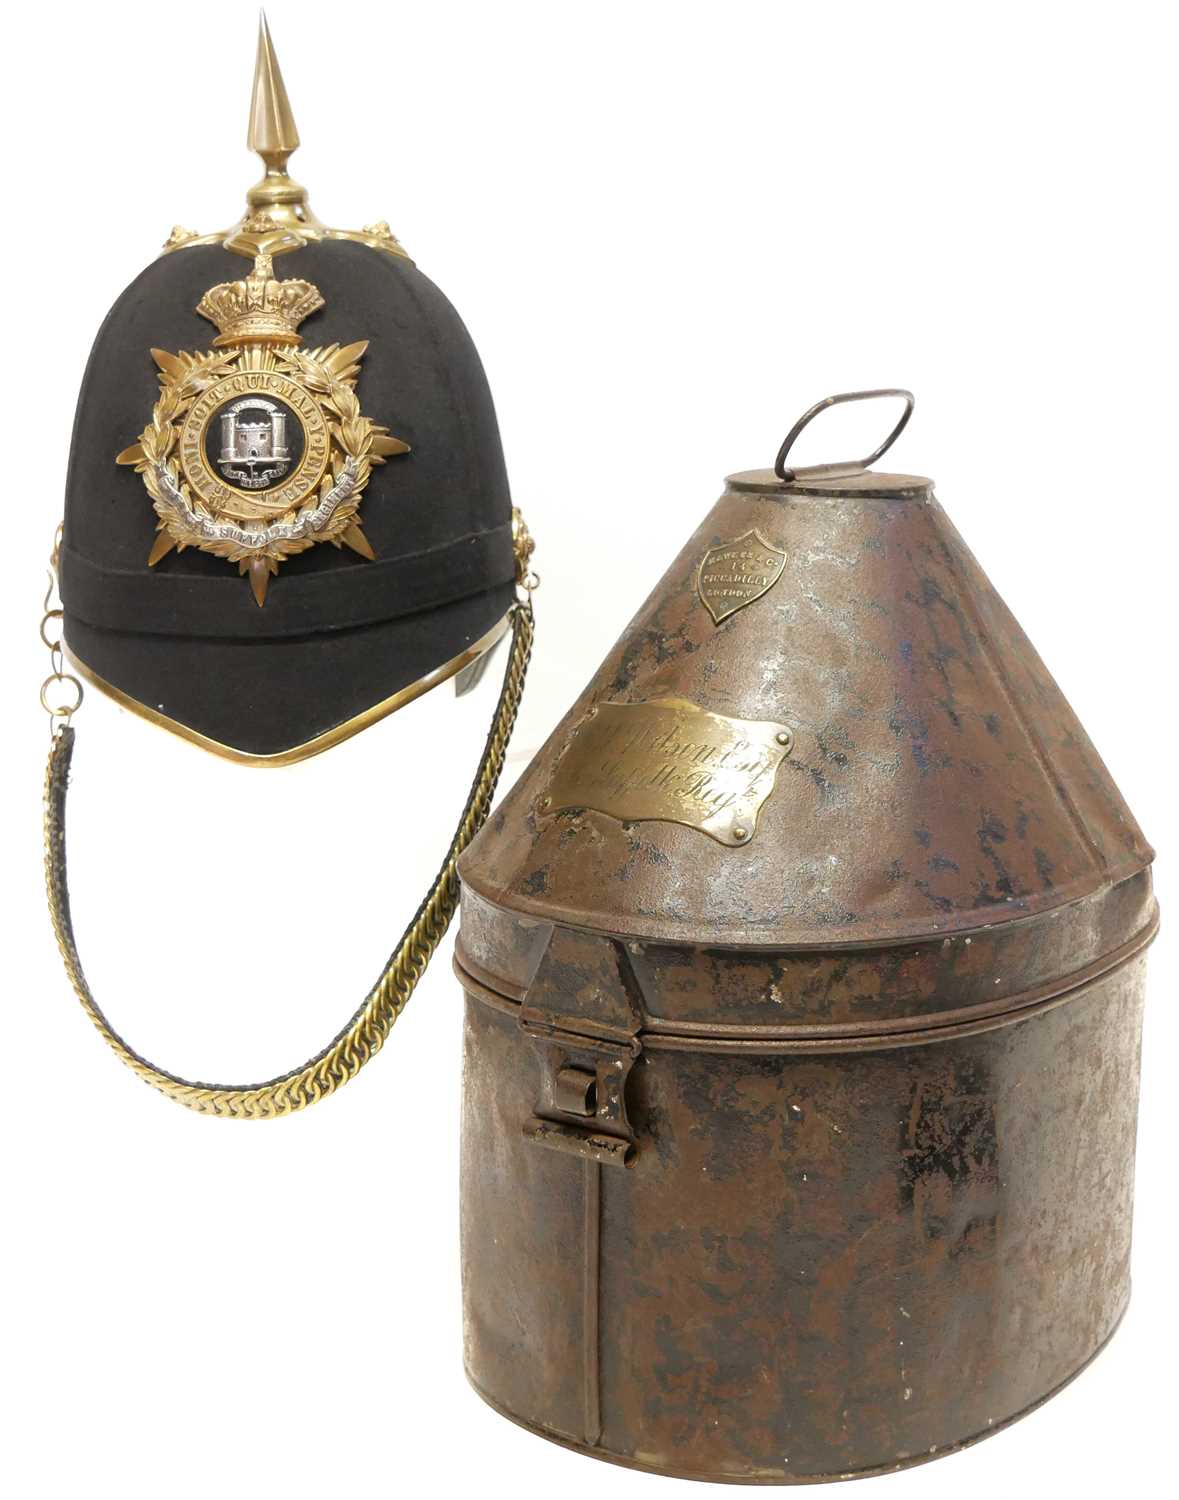 Victorian blue cloth helmet, with The Suffolk Regiment badge, retailed by Hawkes and Co. with '